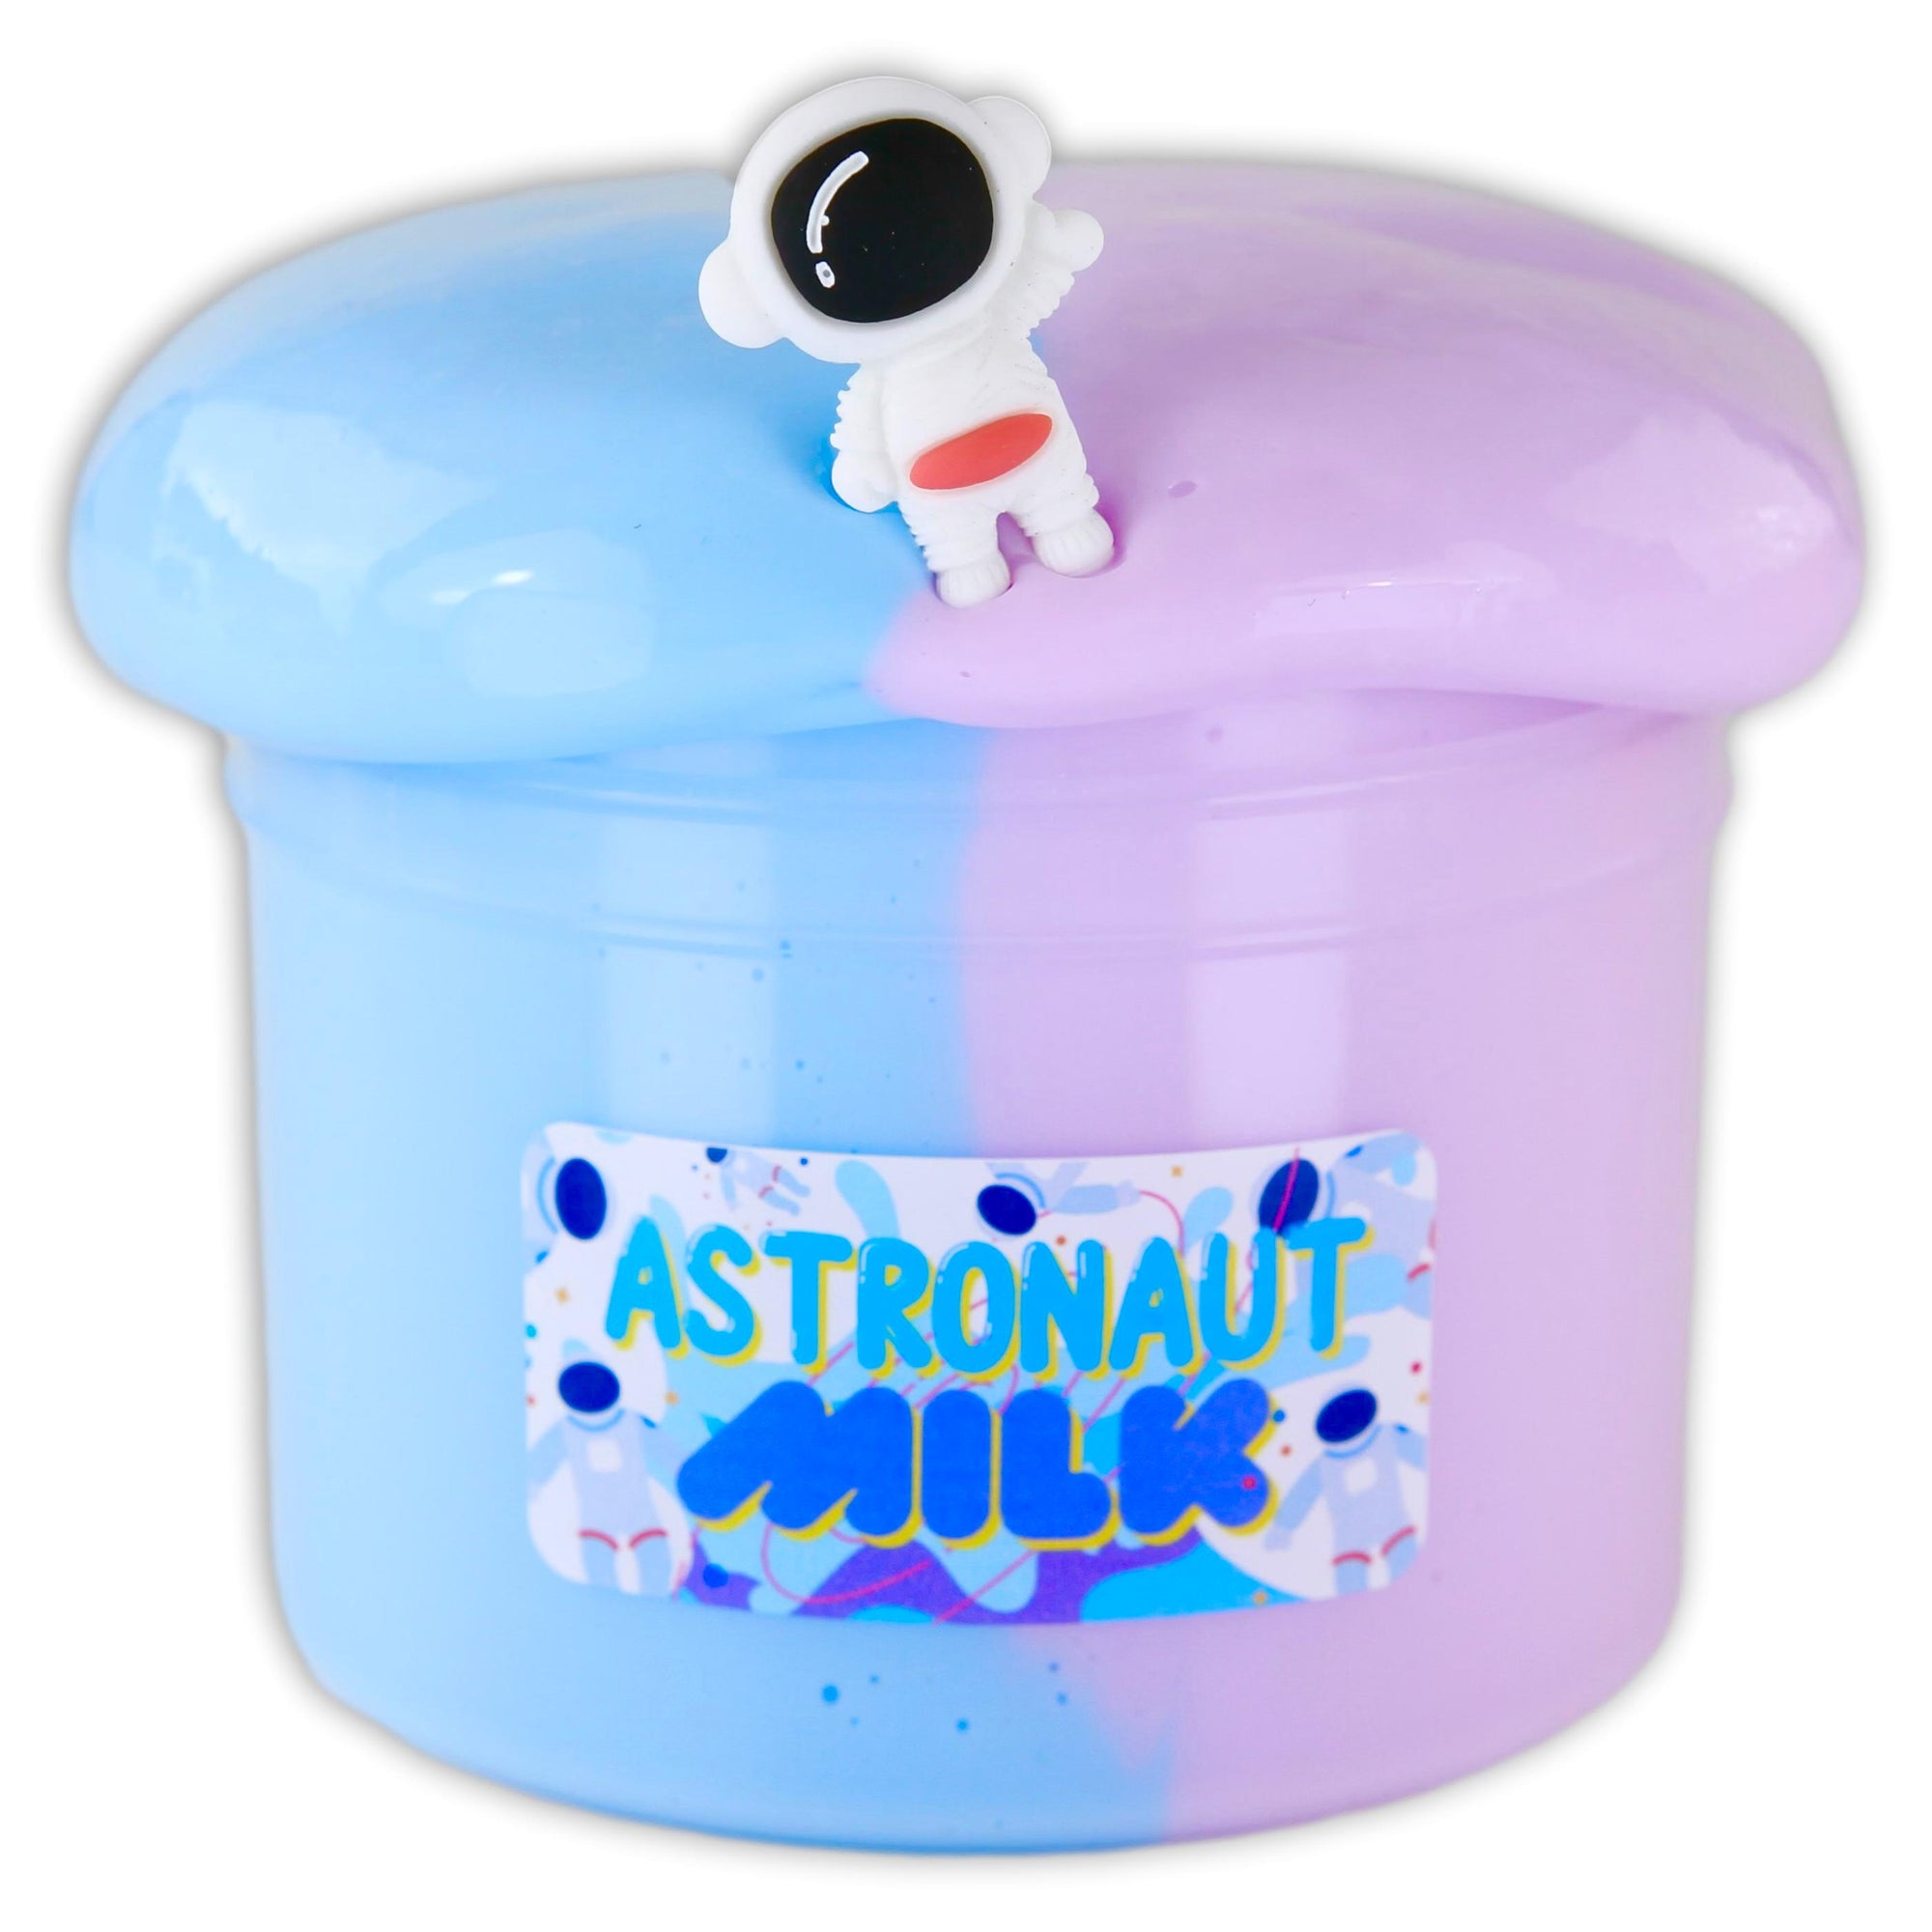 Astronaut Milk Thick & Glossy Slime - Shop Slime - Dope Slimes